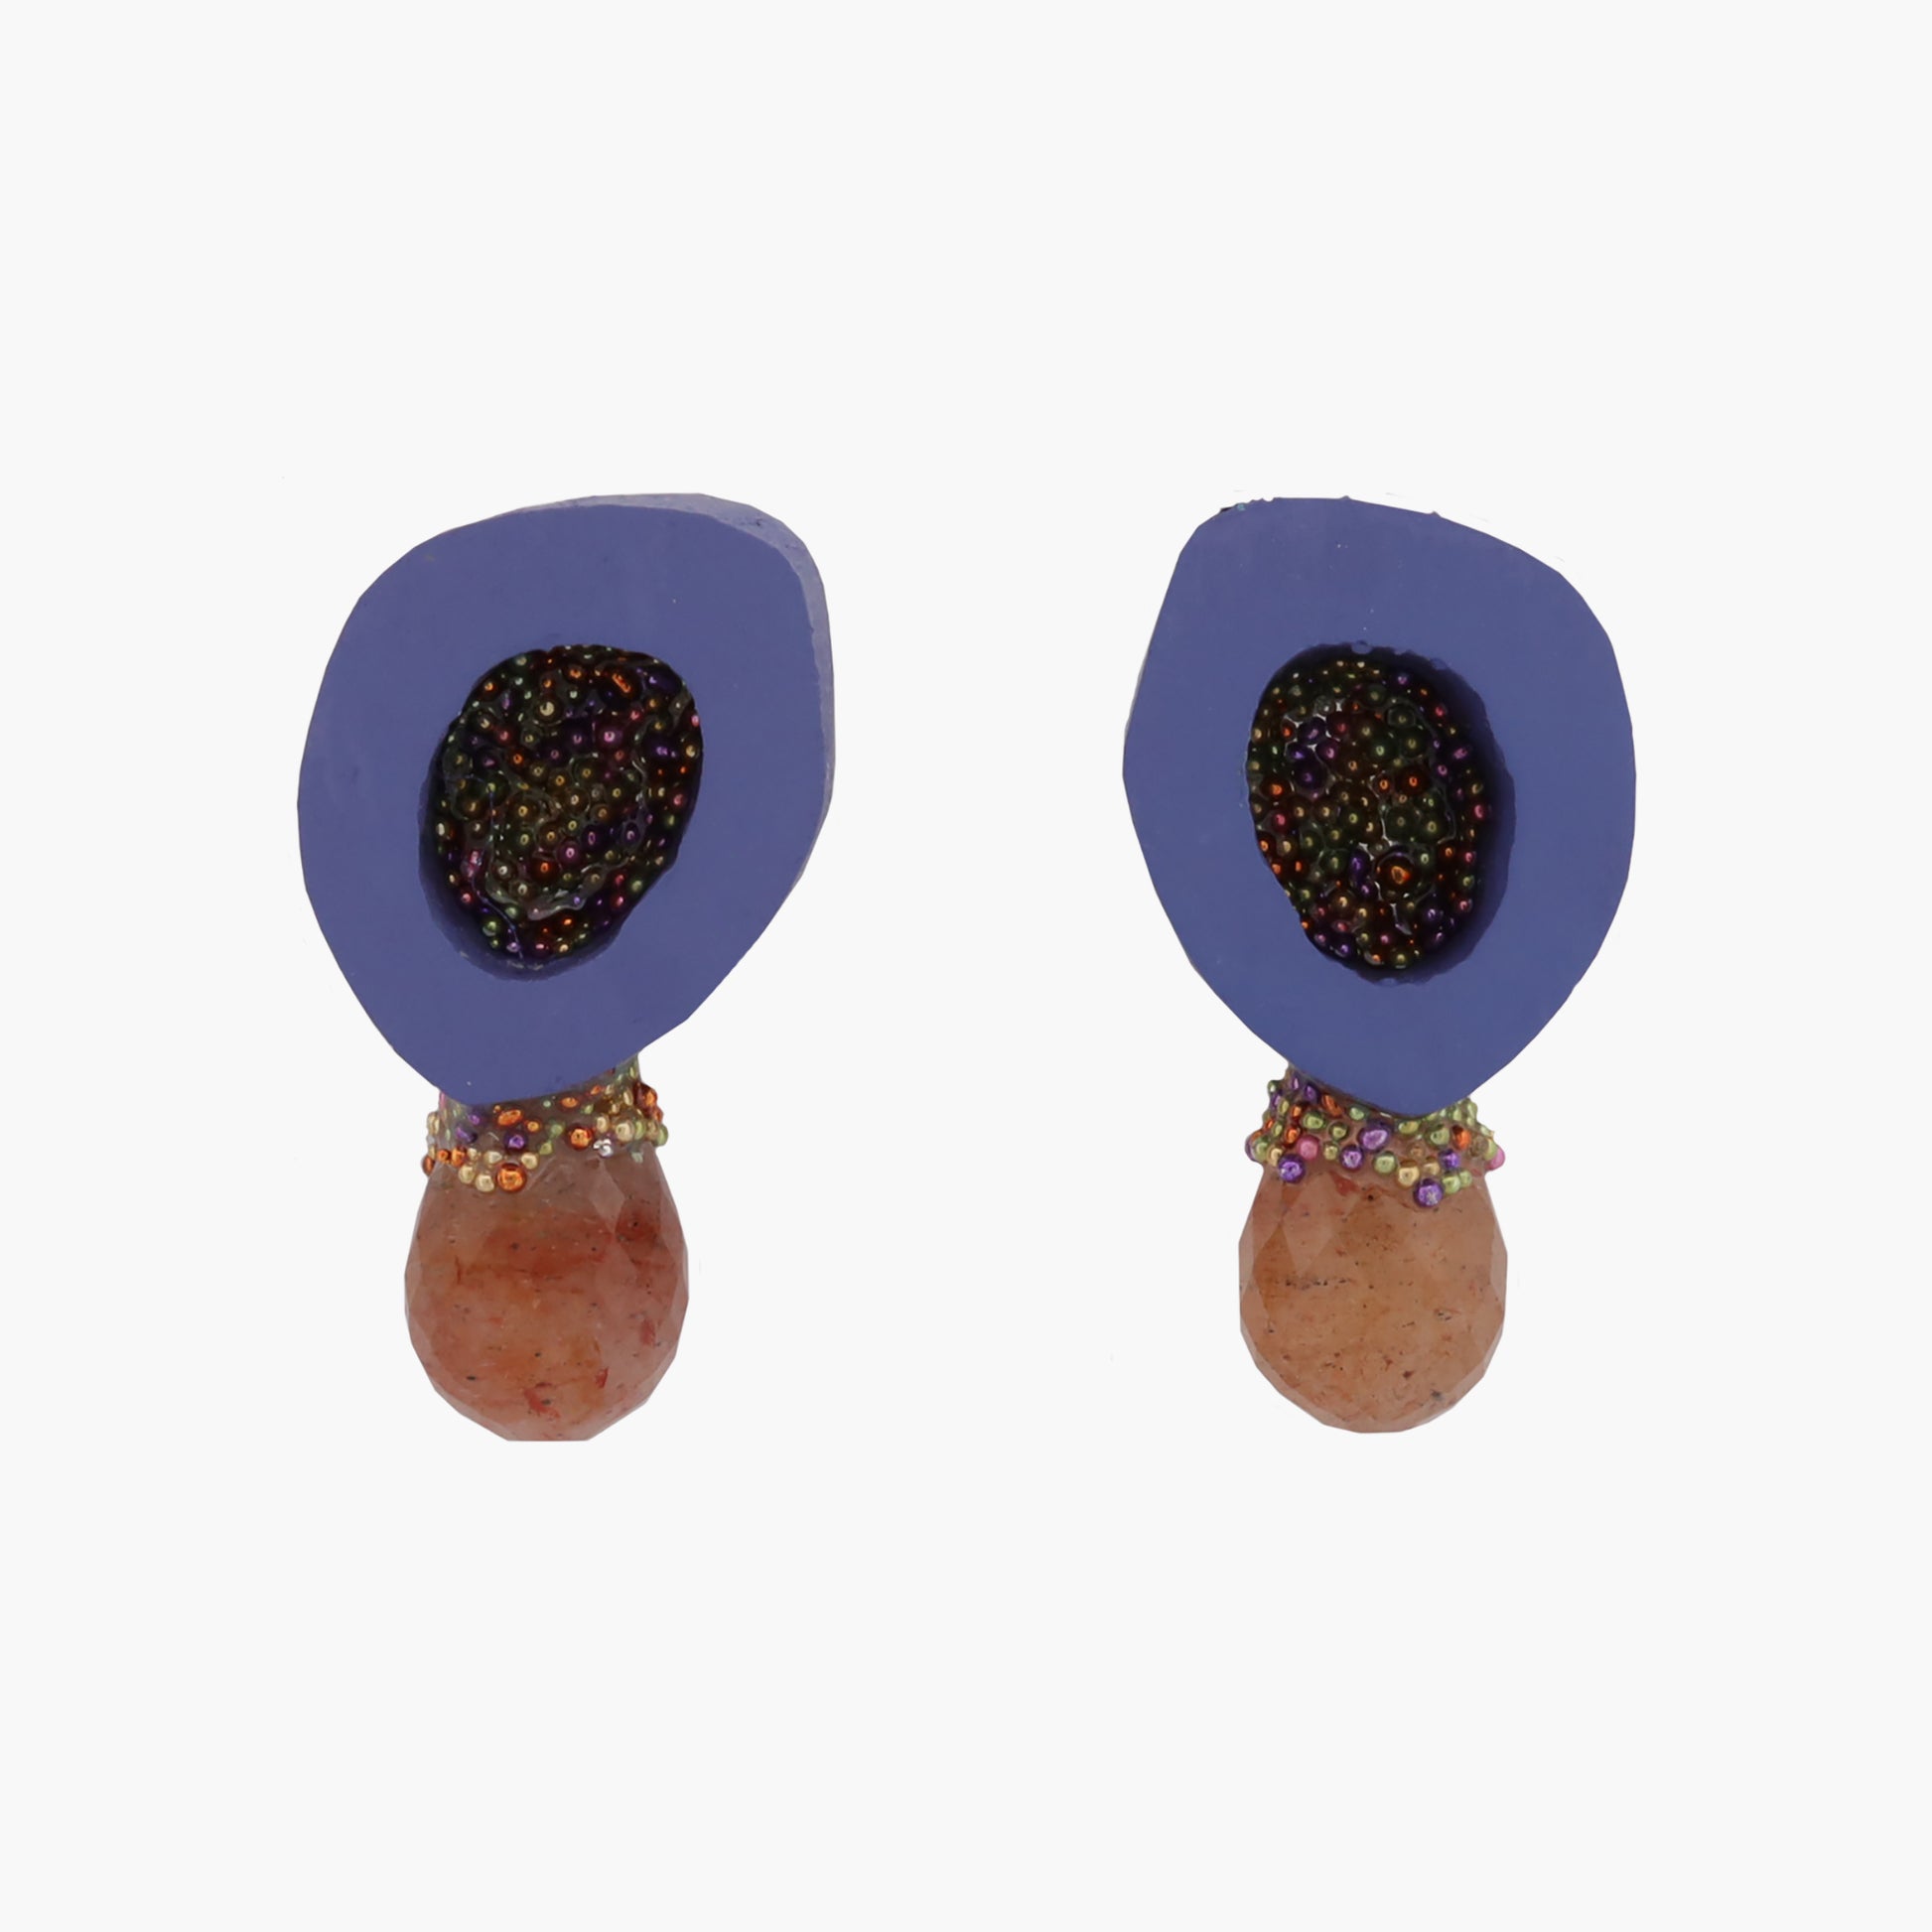 A pair of bone and gemstone stud earrings by Chantel Gushue. The earrings have glass bead details inside the bone and around the gemstone. The earring are shown on a bright background.